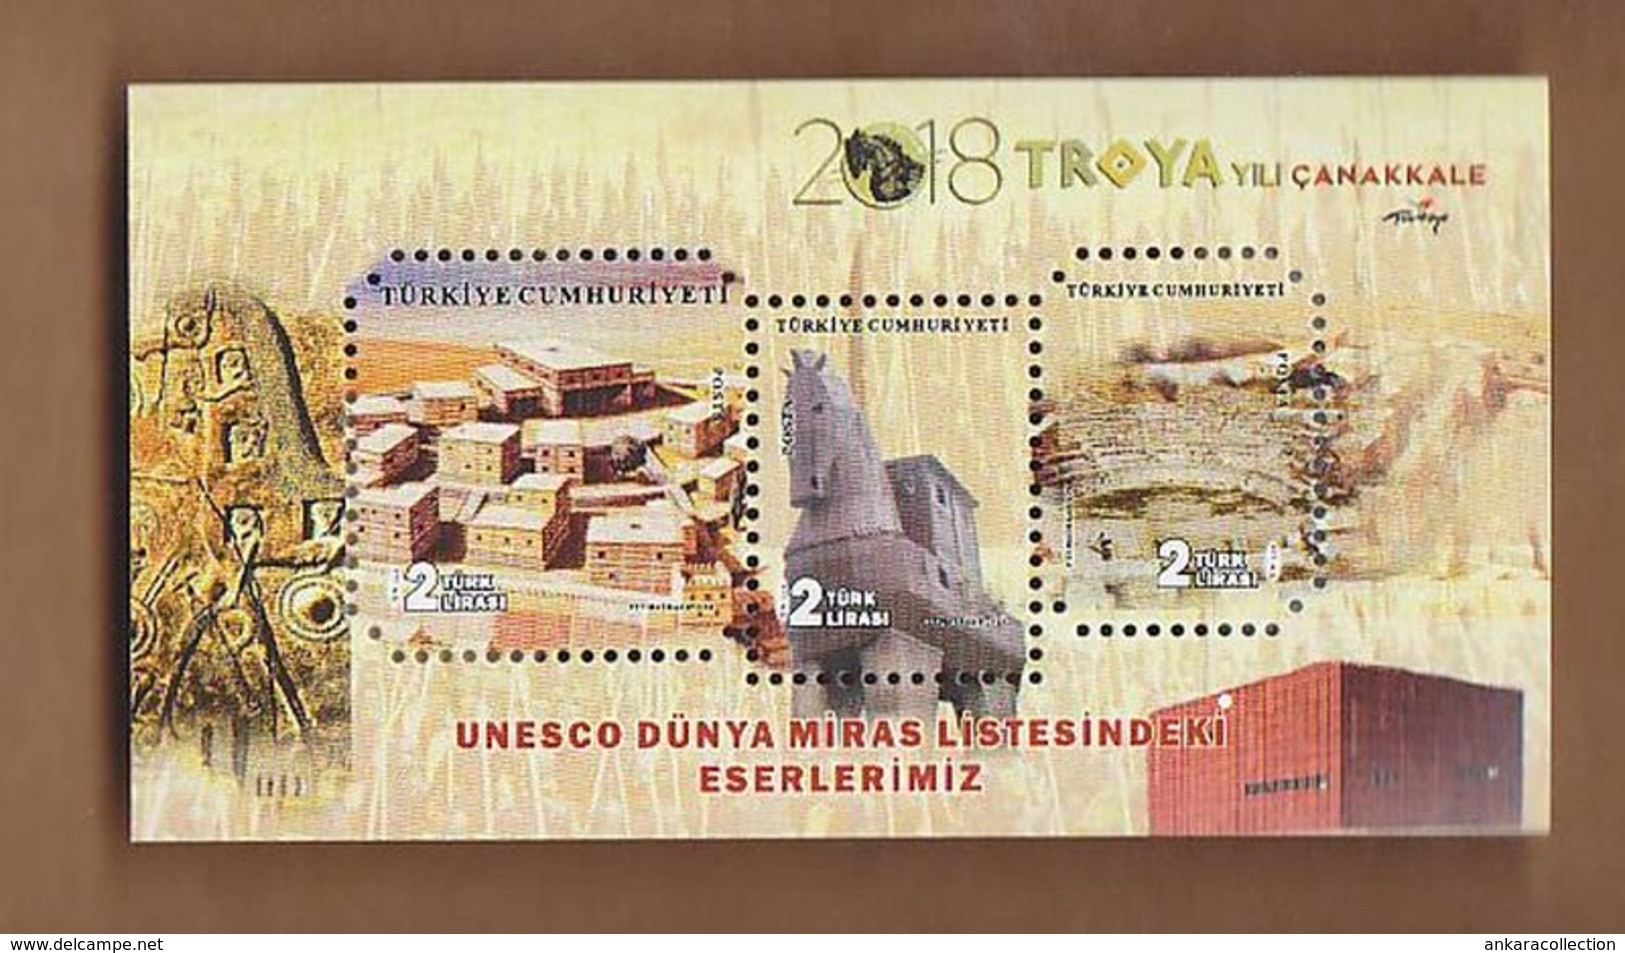 AC - TURKEY BLOCK STAMP - OUR SITES IN UNESCO WORLD HERITAGE LIST TROY TROJAN HORSE CANAKKALE MNH 01 AUGUST 2018 - Blocks & Sheetlets